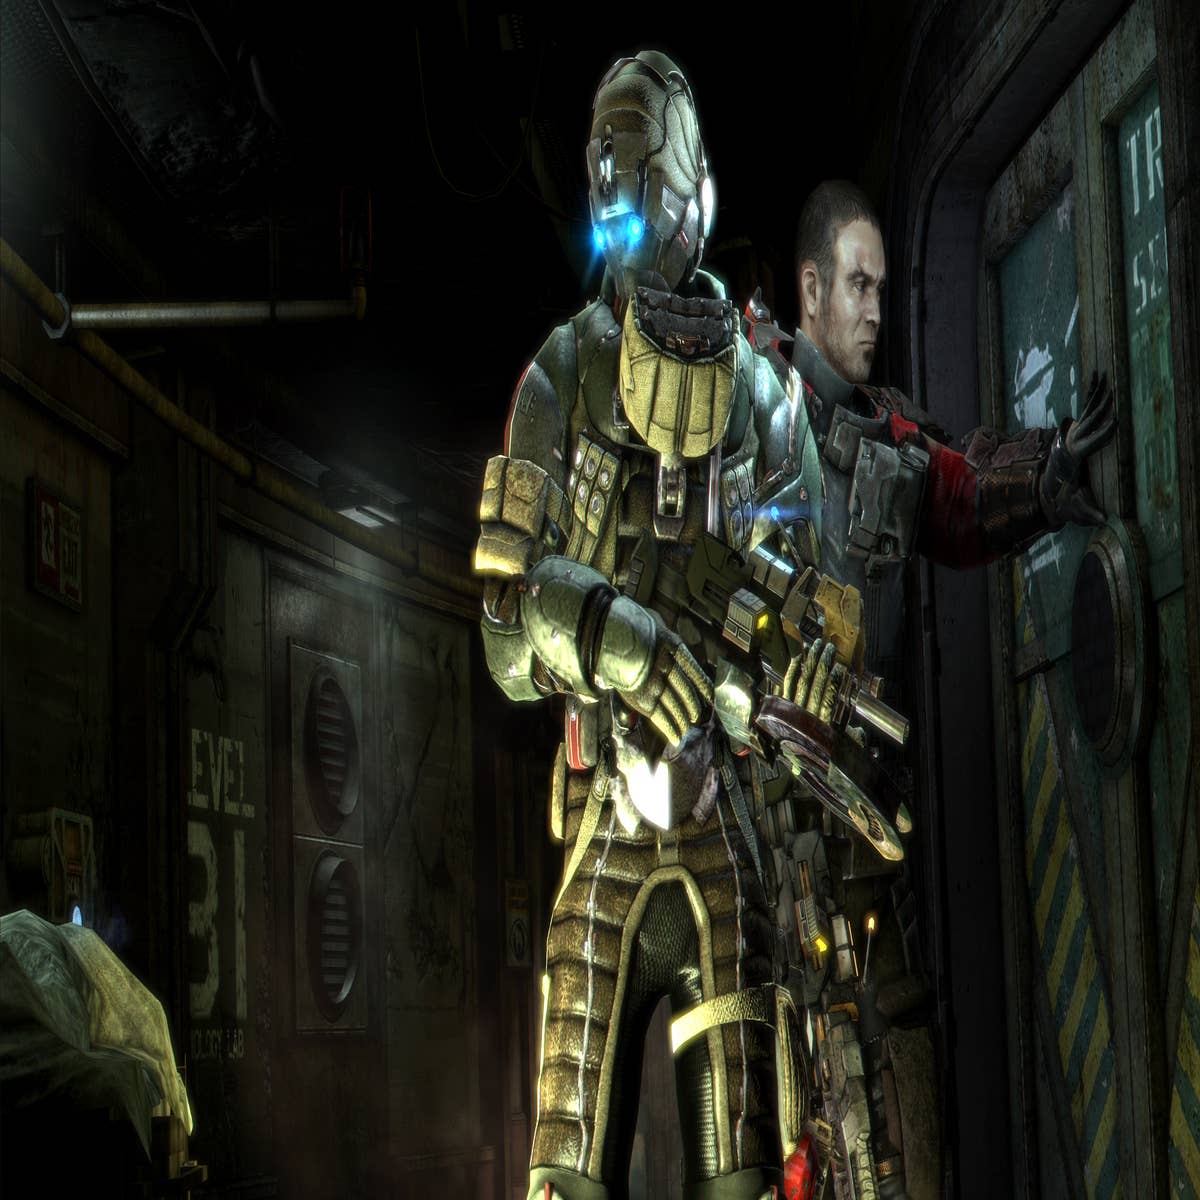 Has Dead Space 4 been cancelled? - Dead Space 3 - Gamereactor